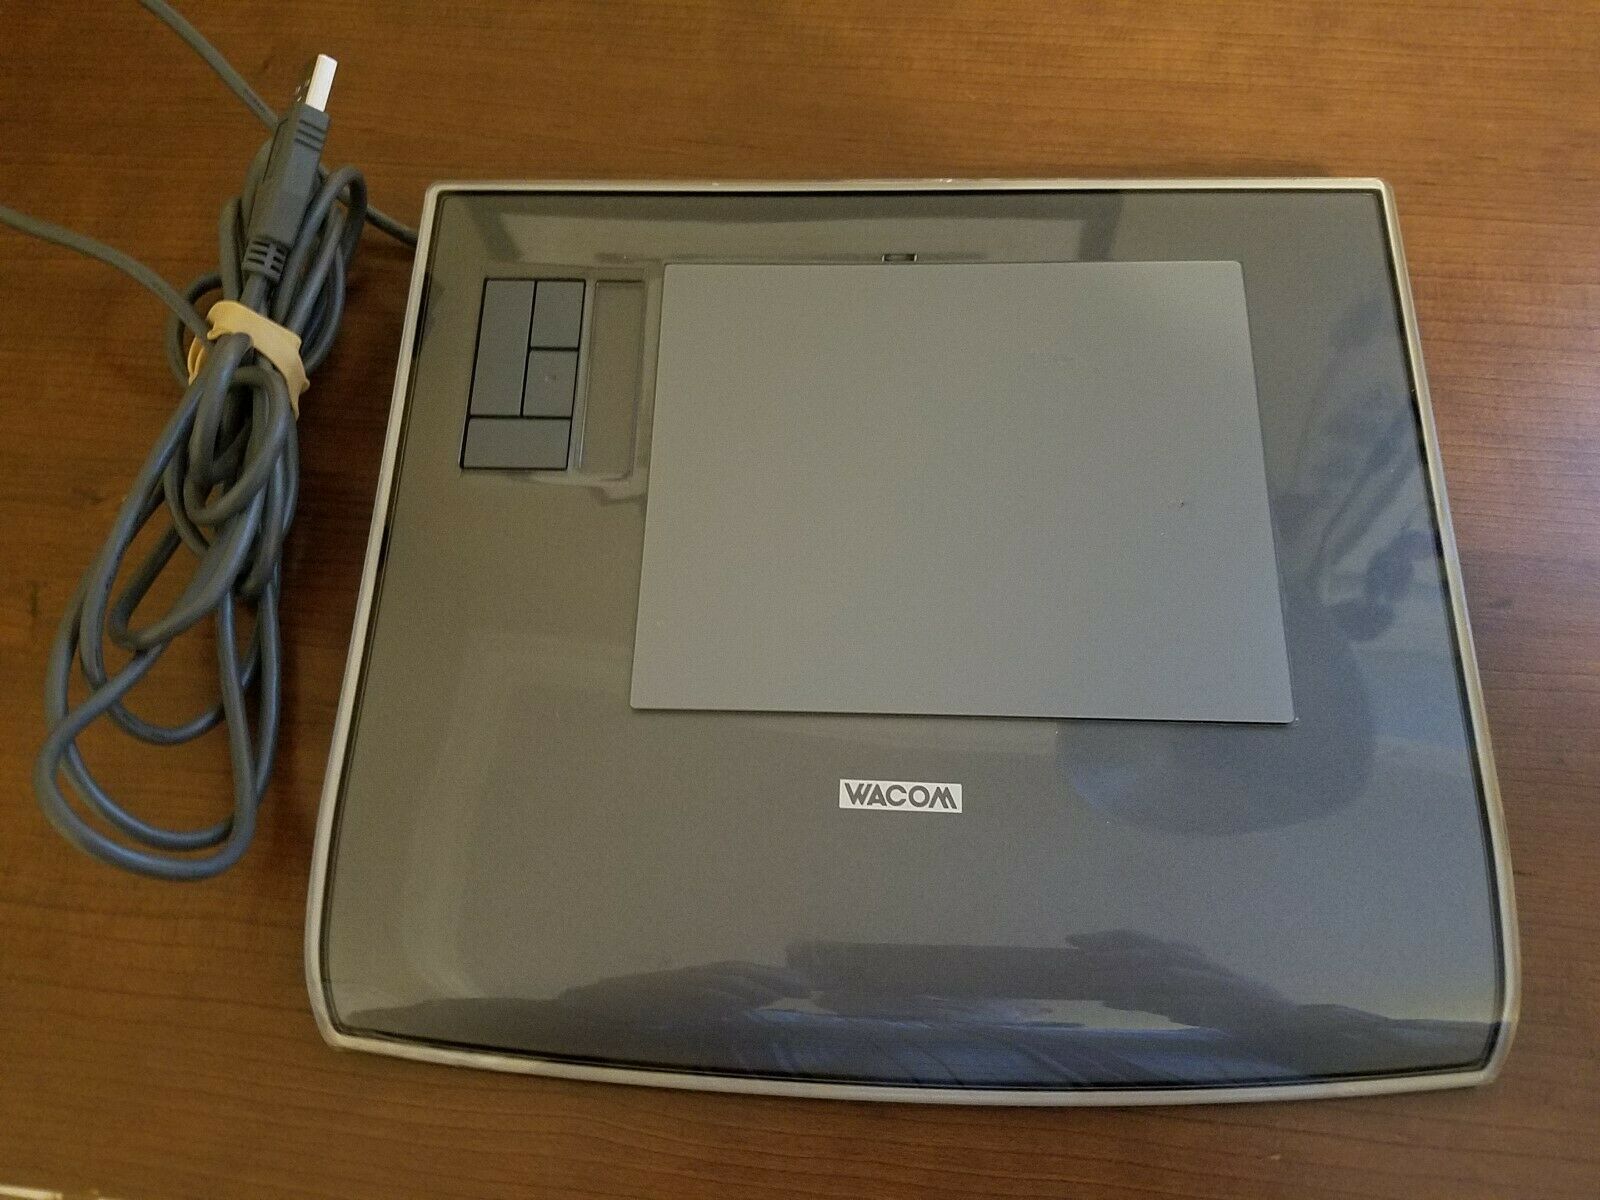 Intuos 3 PTZ430 Graphic Drawing Tablet Graphic Design Geek